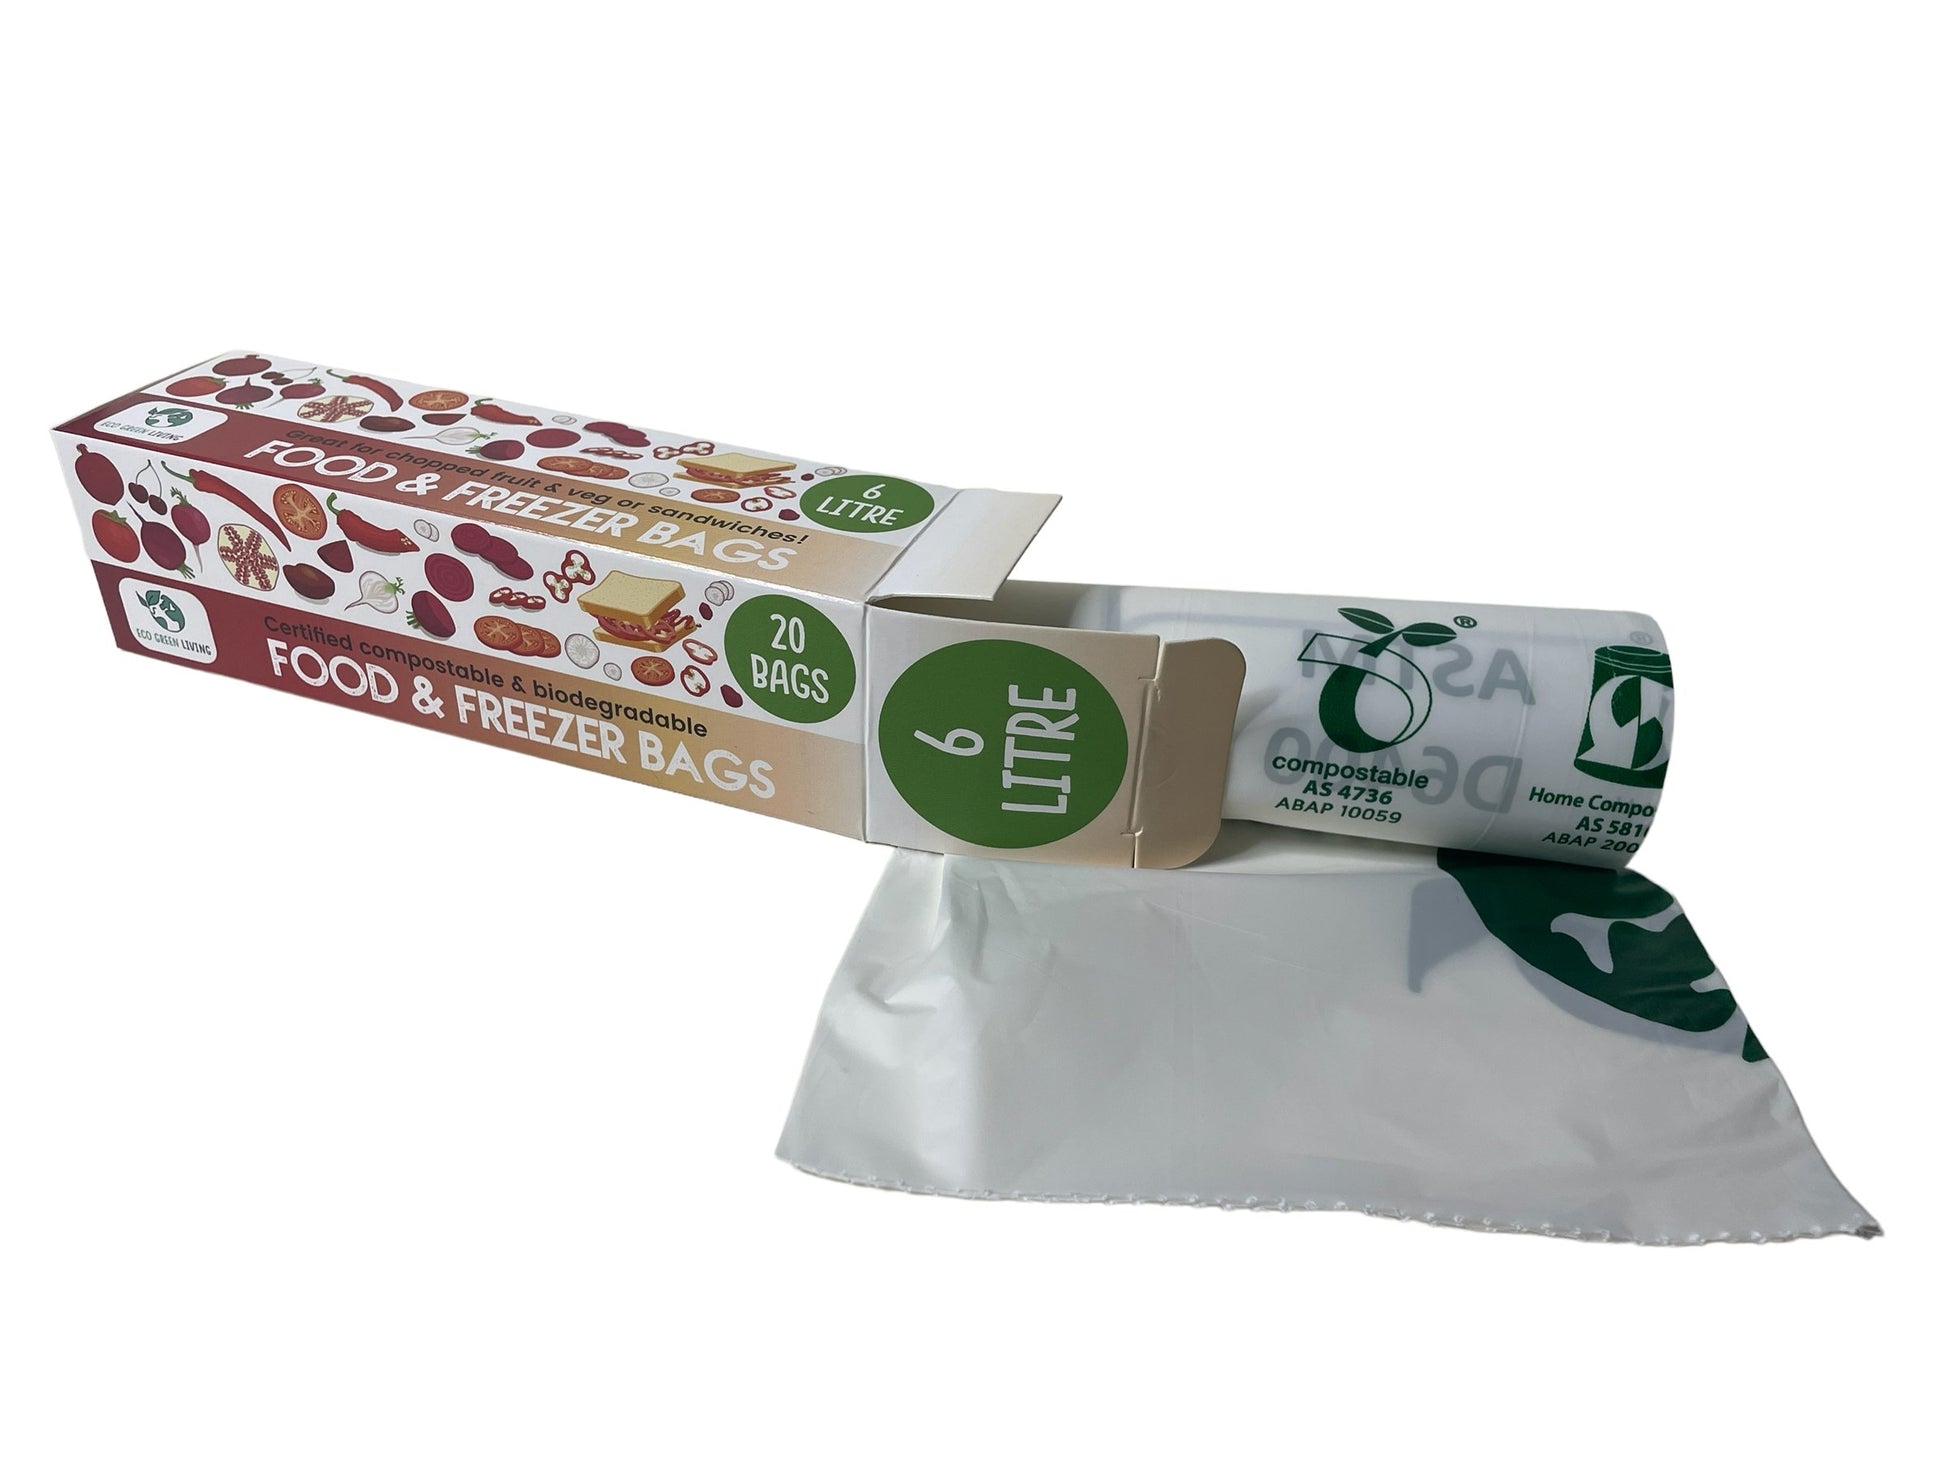 Certified Compostable Food & Freezer Bags 6 Litre (20 bags) - Eco Green Living